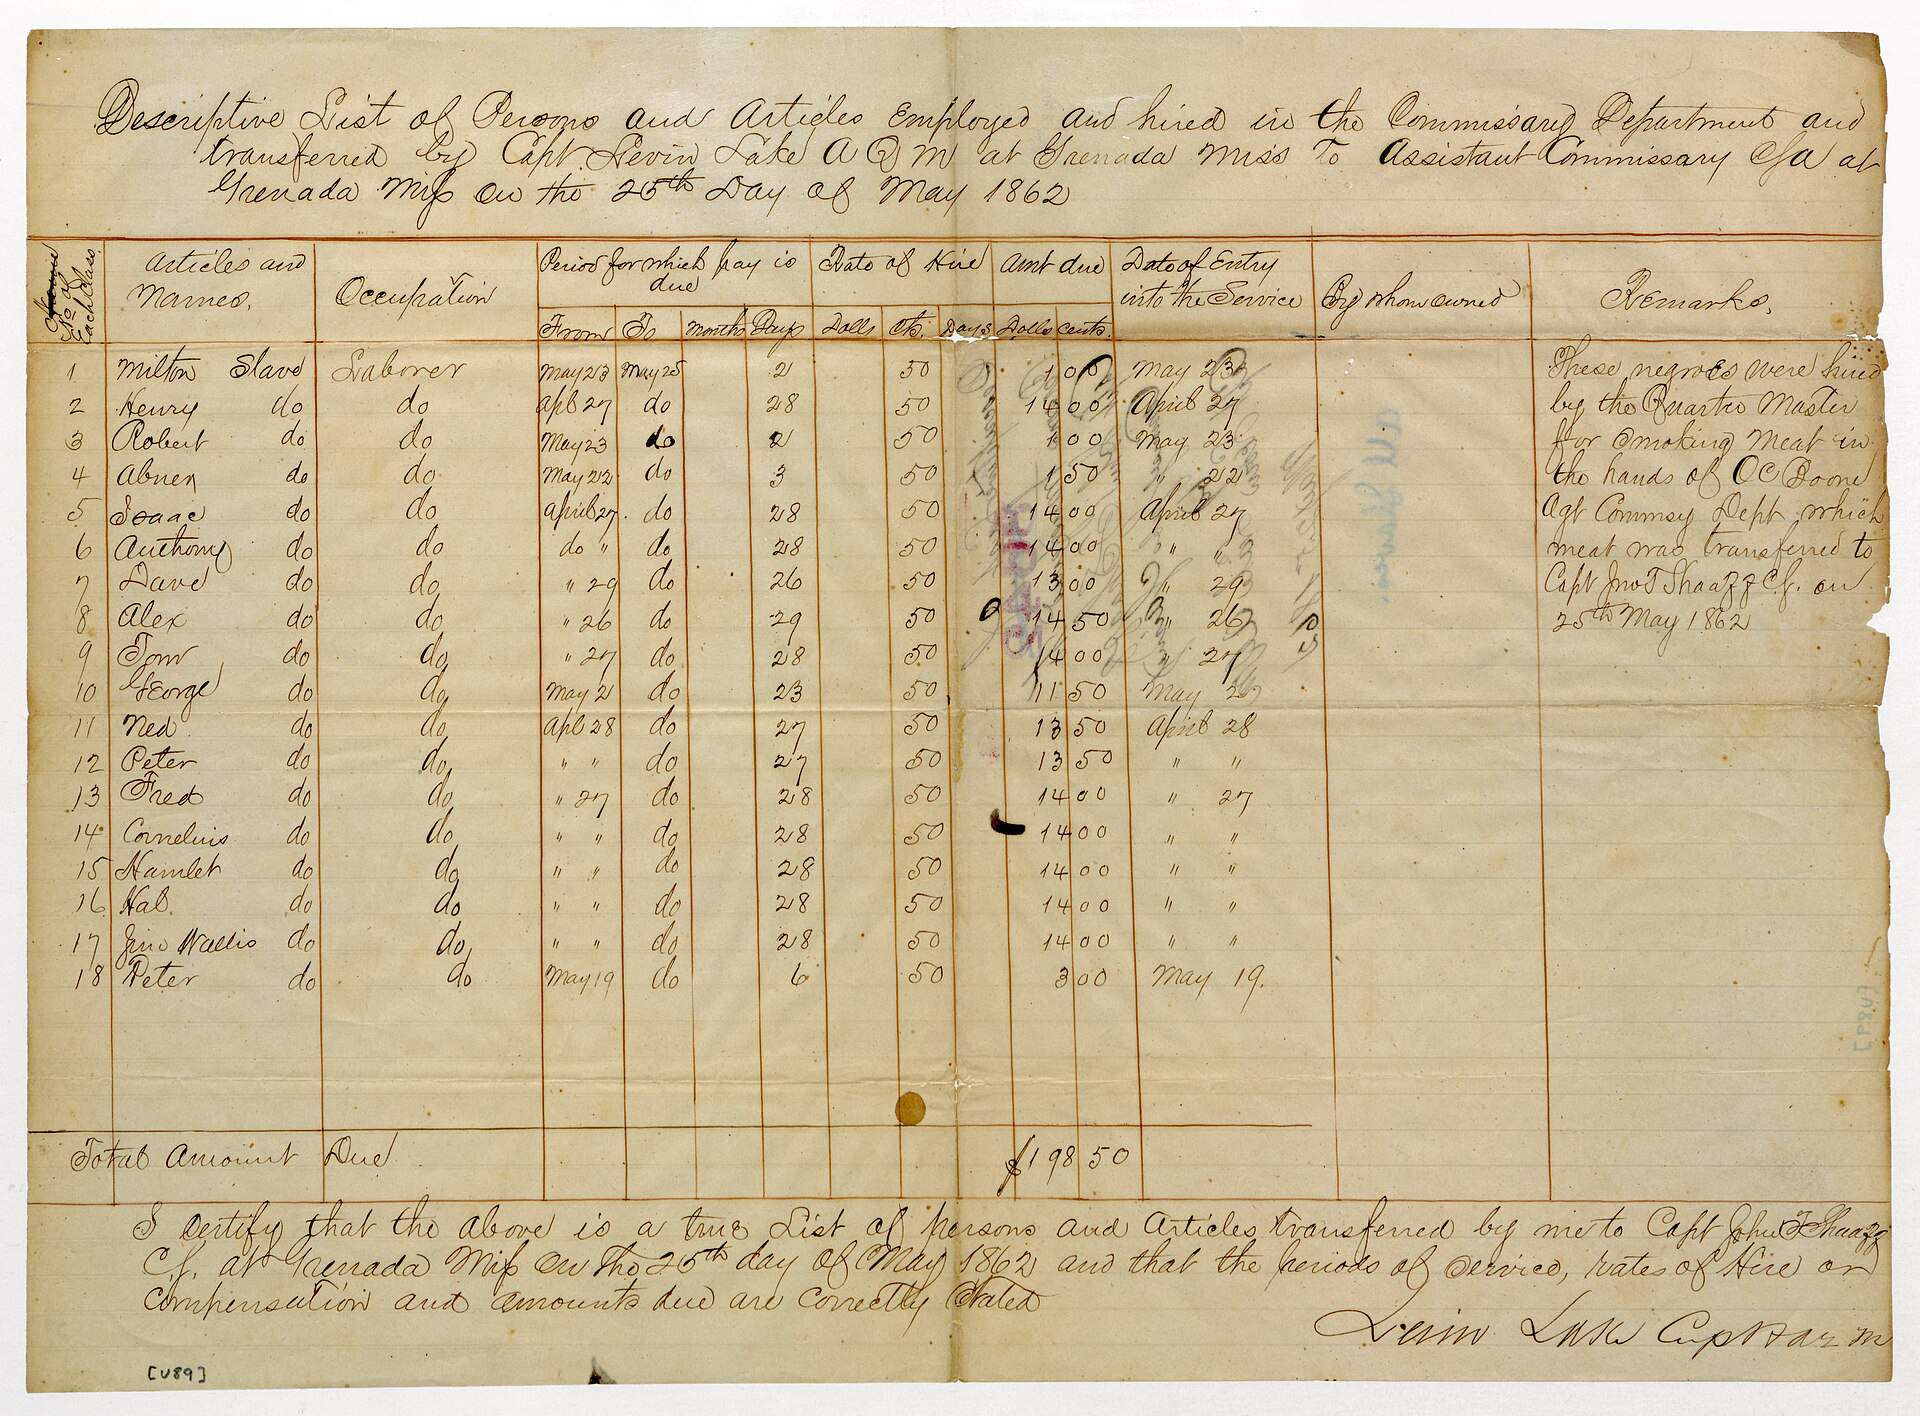 Slaves payroll during Civil War for Confederate army